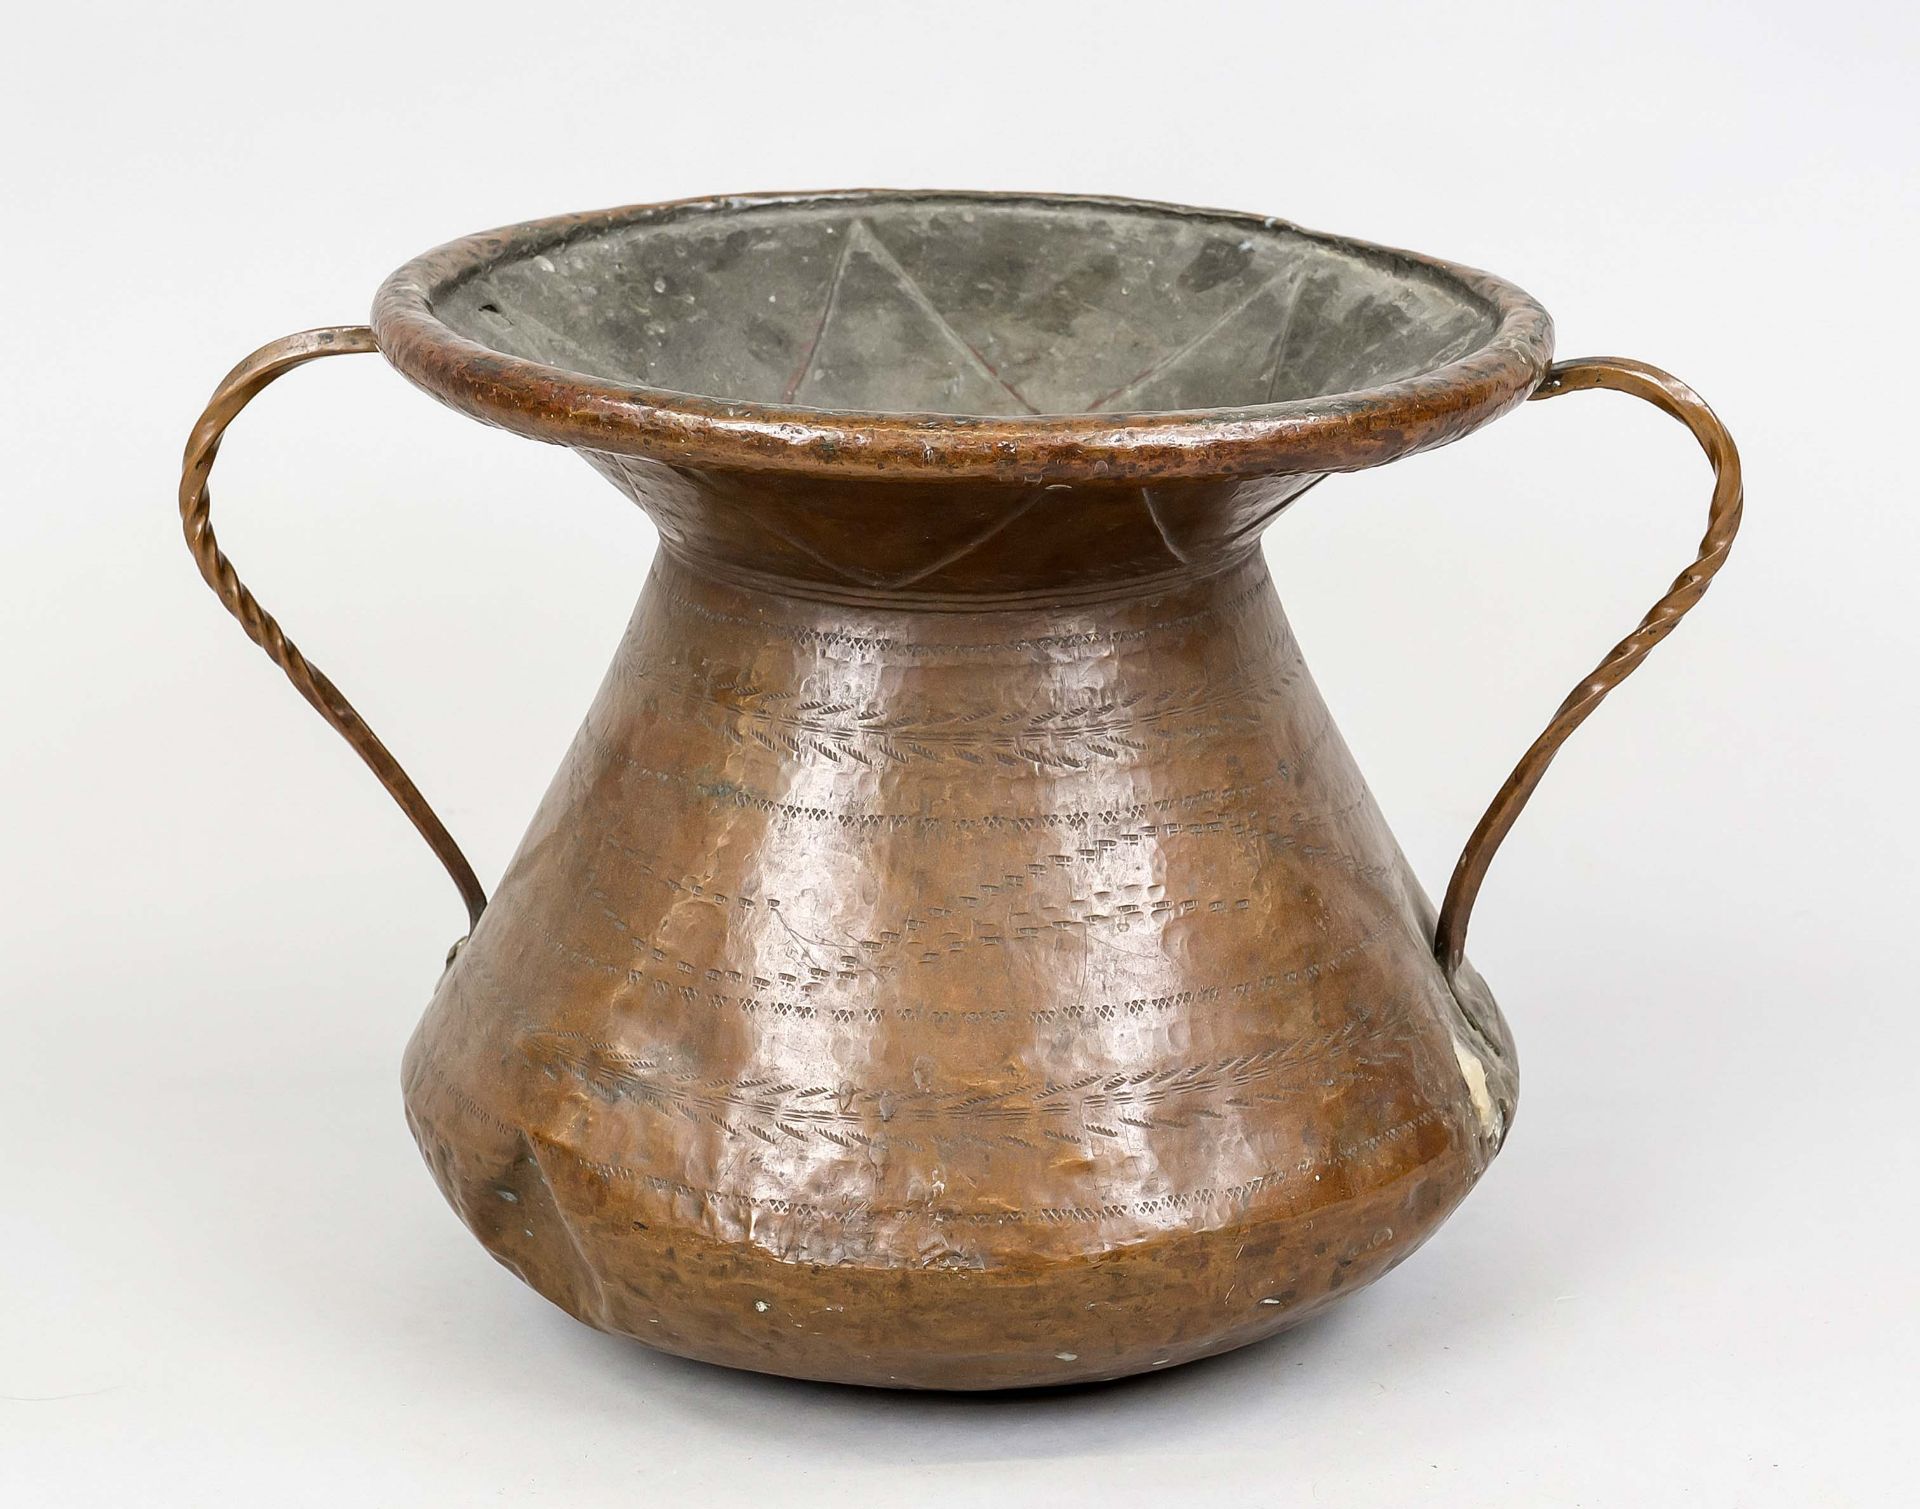 Copper vessel with double handle, 19th century, wall with embossed decoration, funnel-shaped